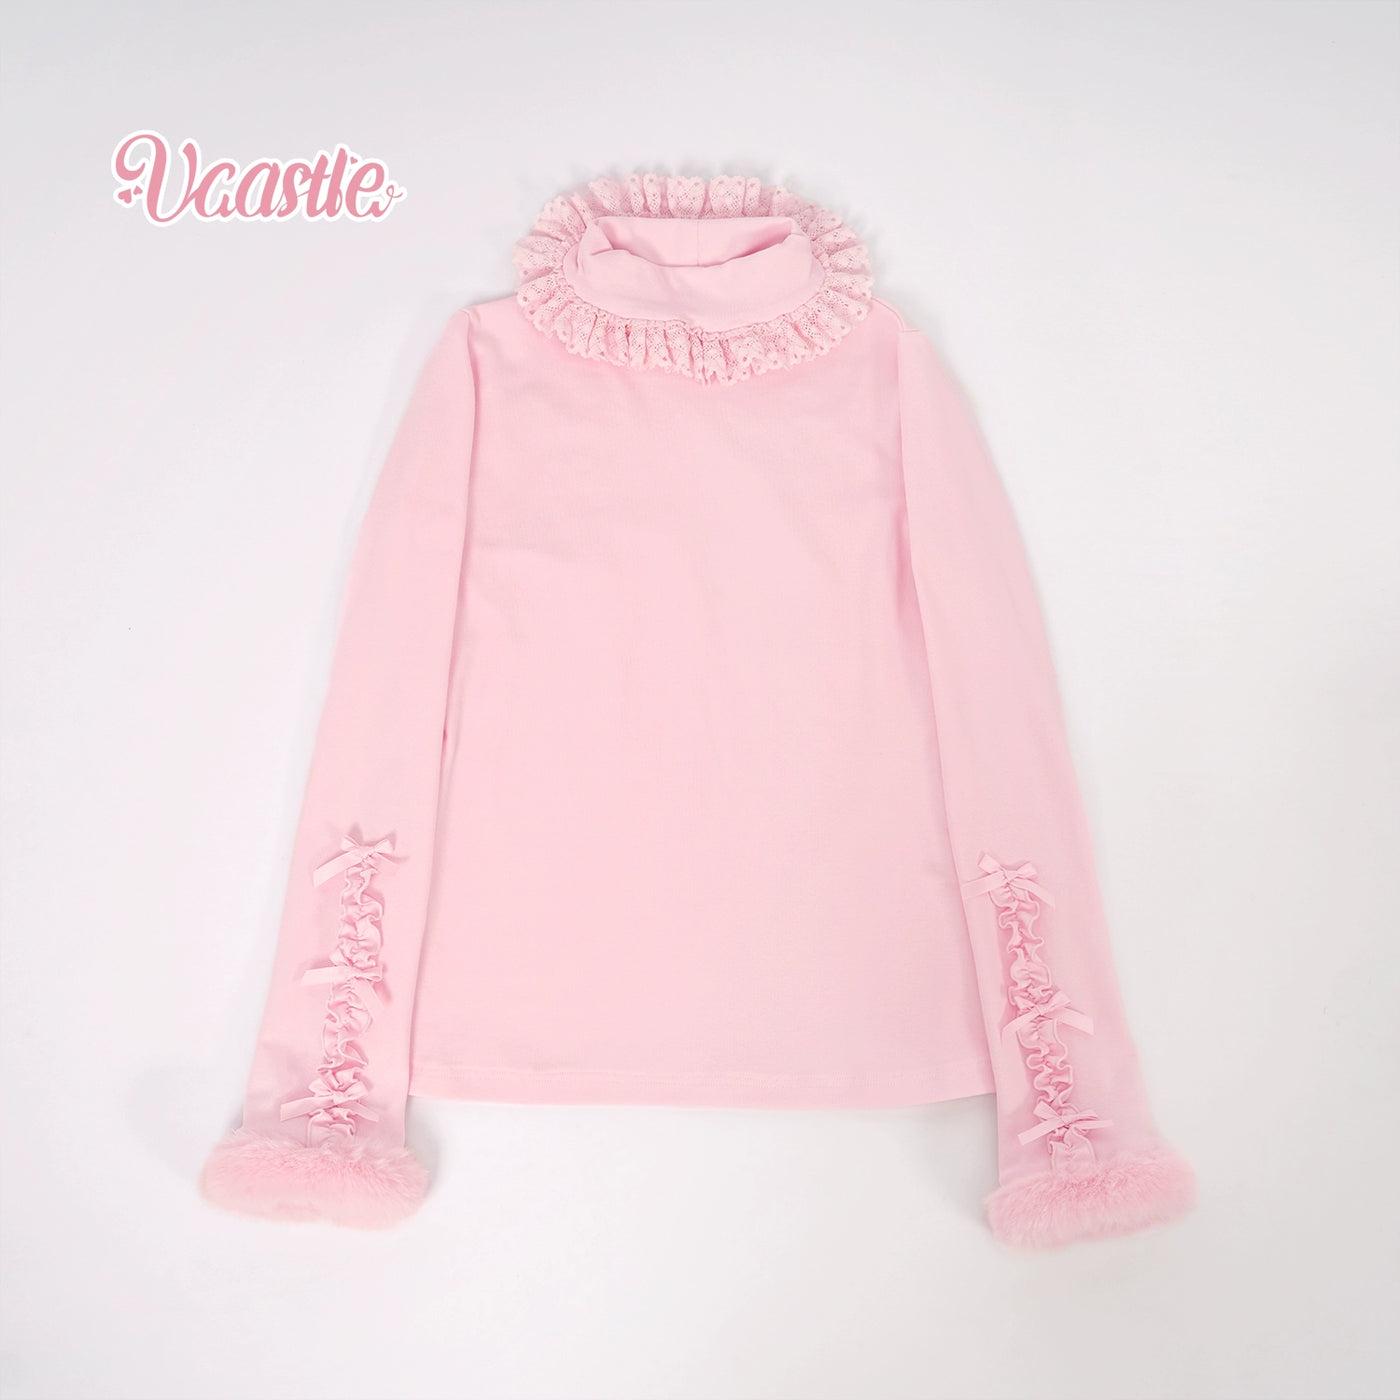 (Buy for me) Vcastle~Sweet Lolita High-neck Long Sleeve Sweater S pink 